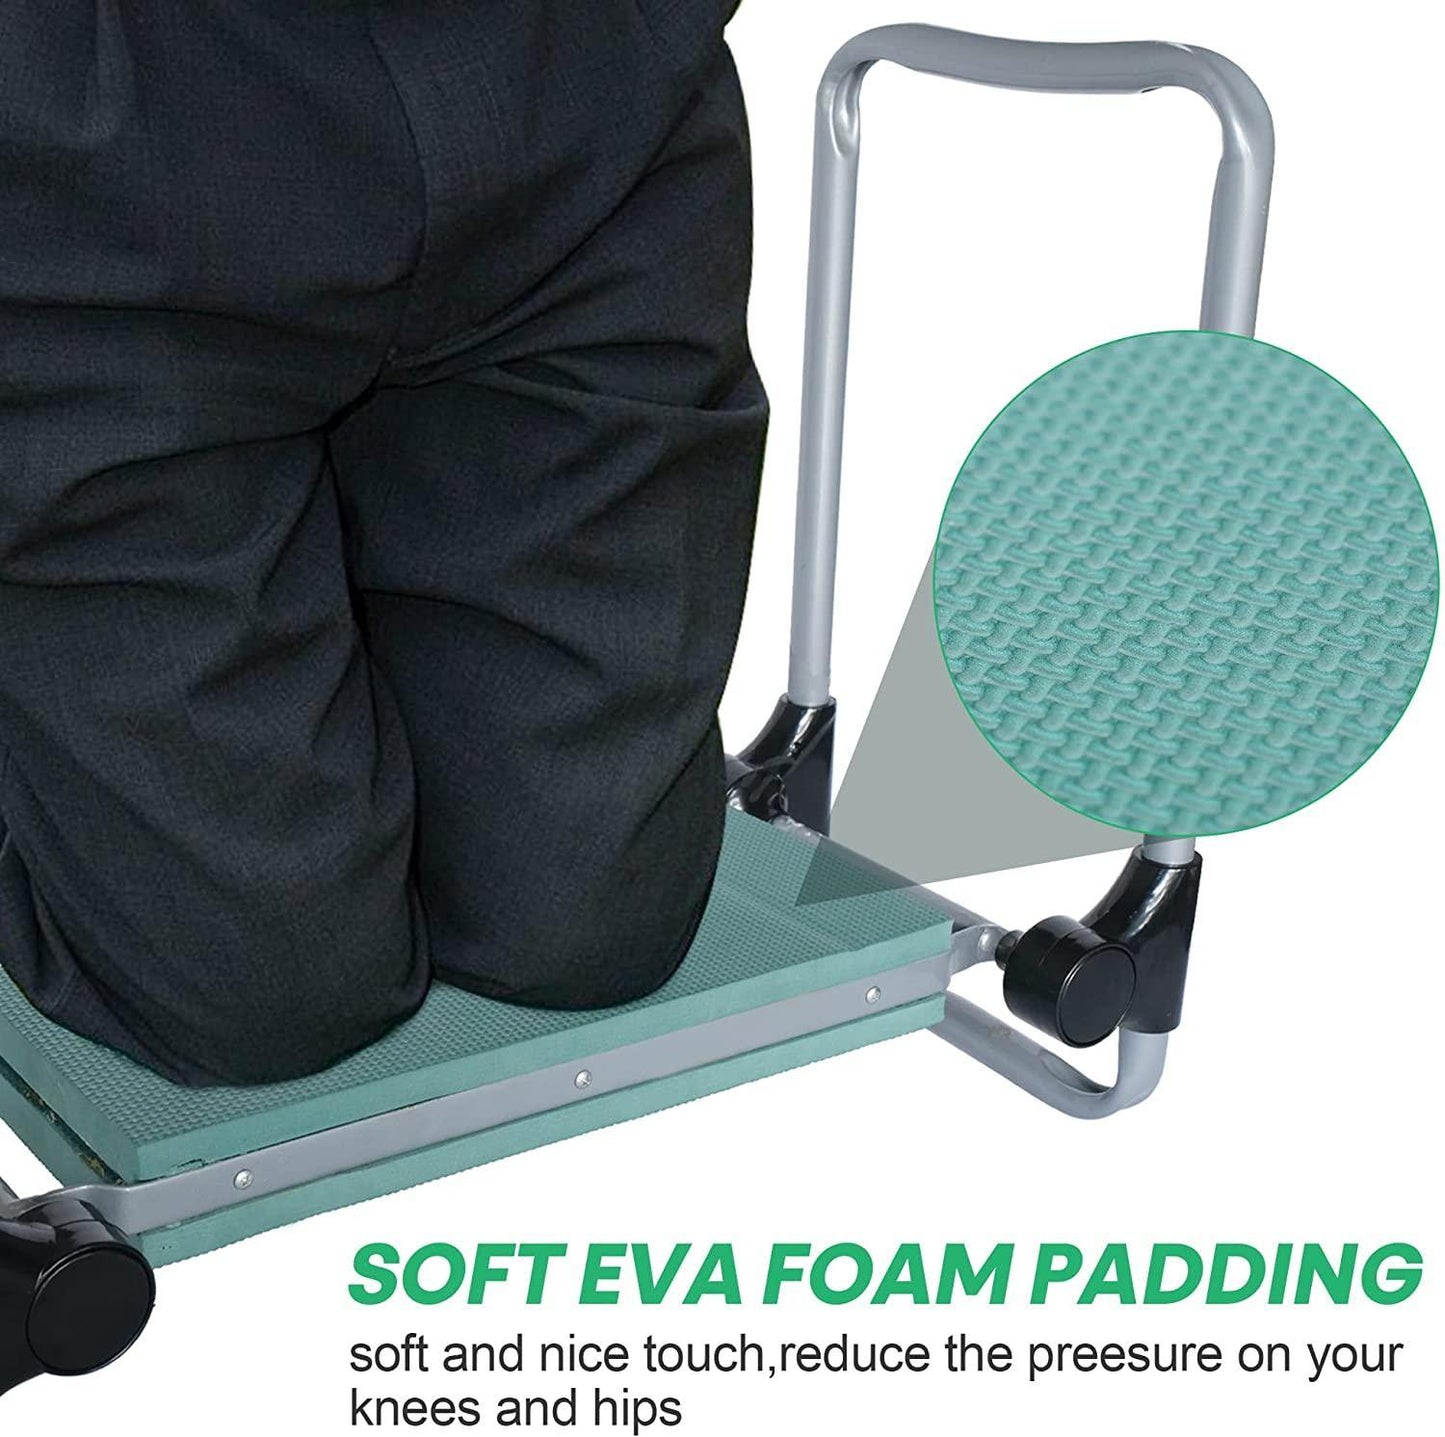 Garden Kneeler and Seat Stool, Foldable Garden Bench with Tool Pocket and Soft EVA Kneeling Pad for Senior, Gardening Lovers